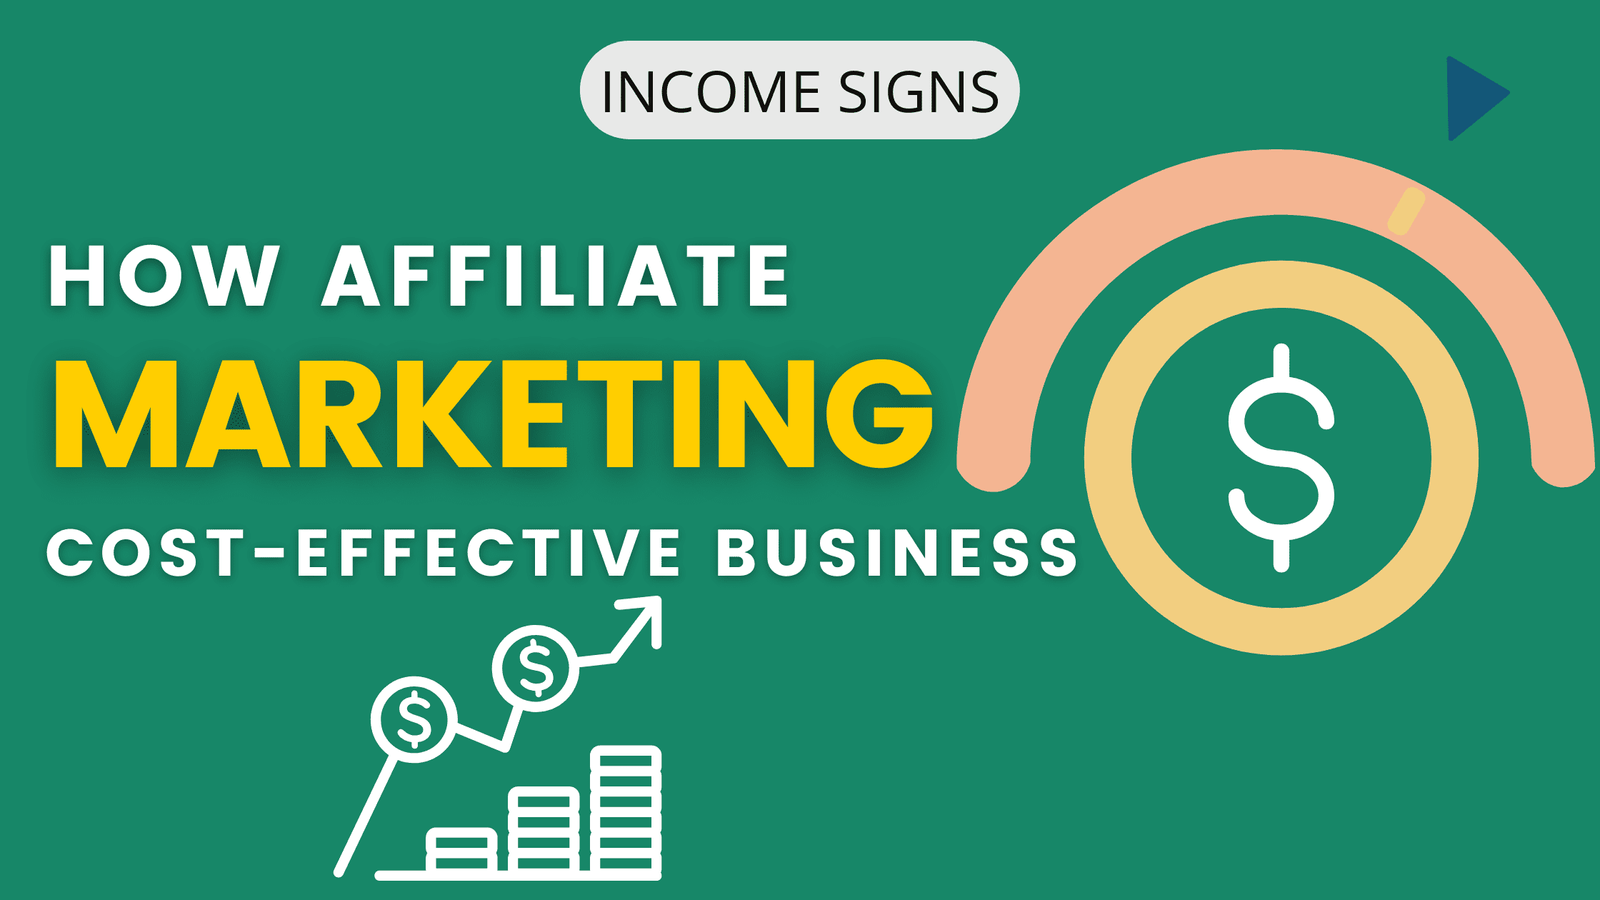 How Affiliate Marketing is a Cost-Effective Business?